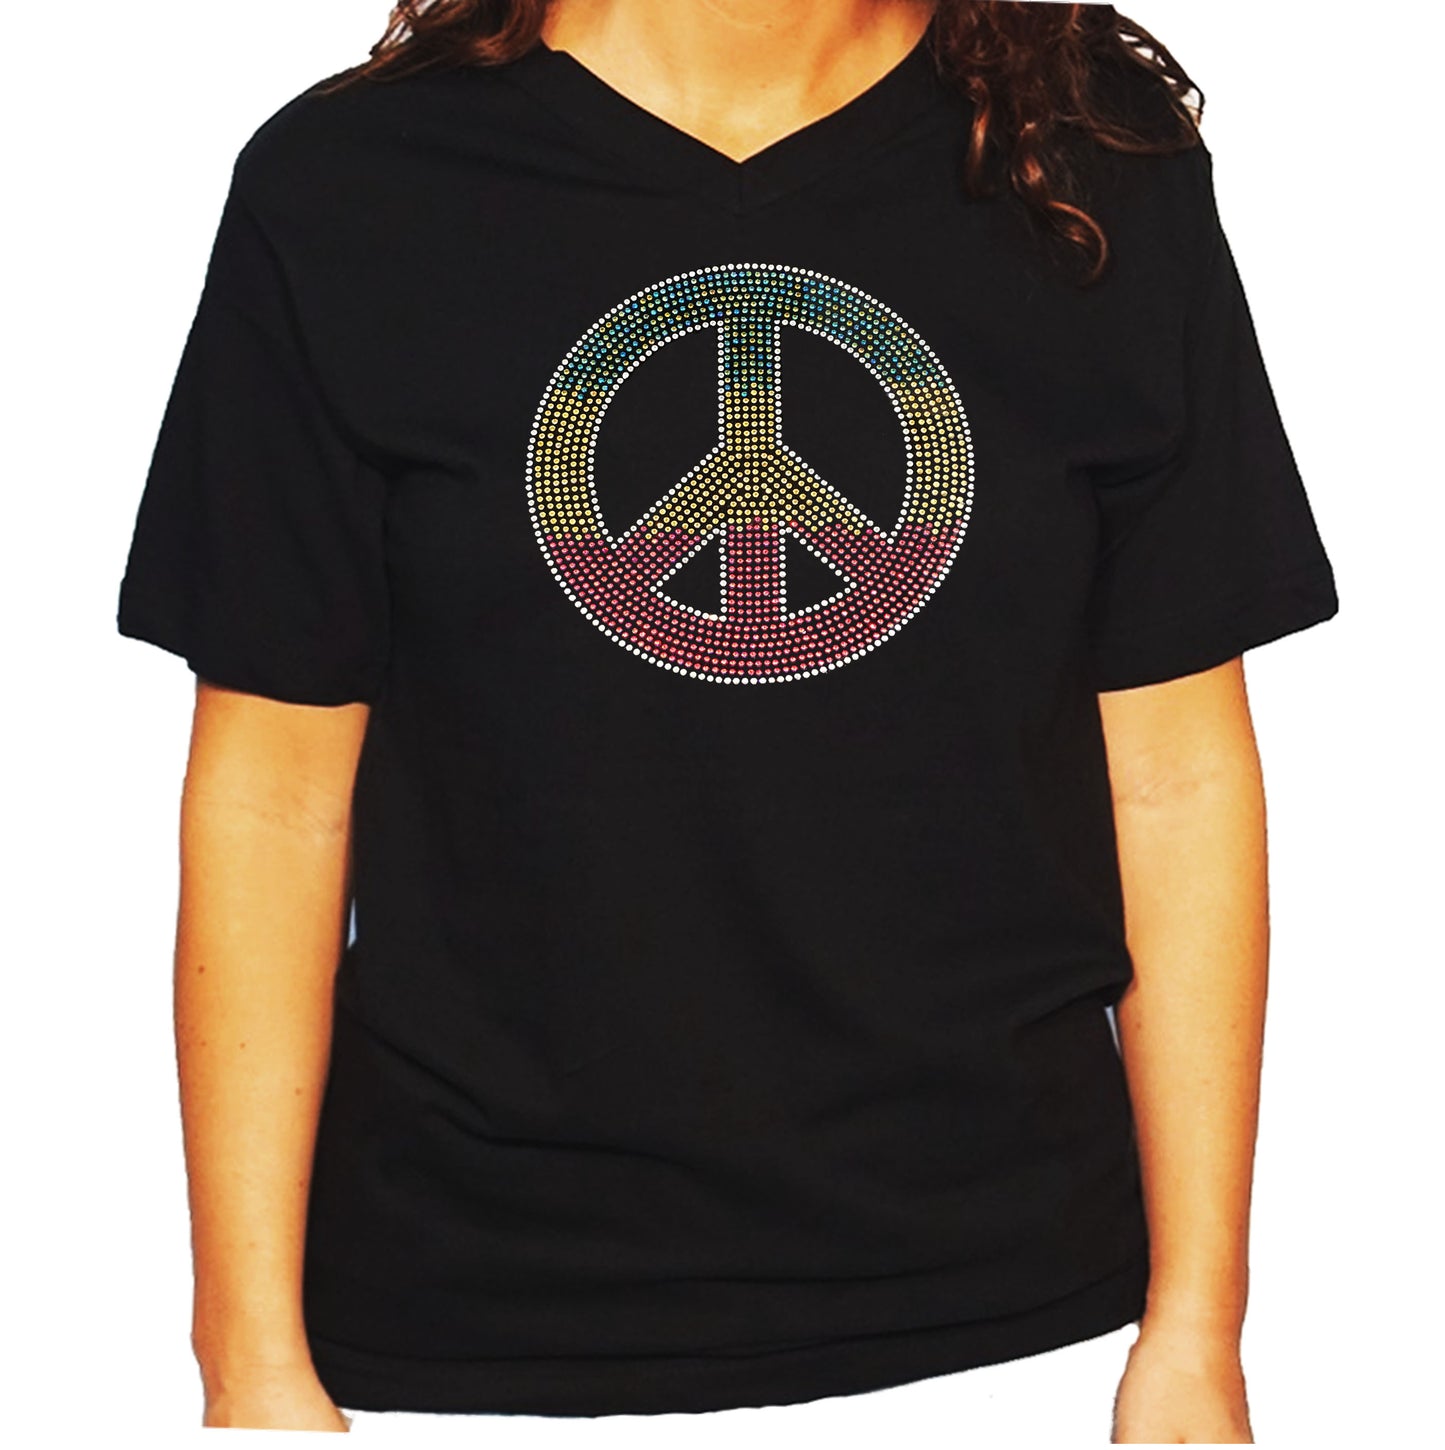 Women's / Unisex T-Shirt with Colorful Peace Sign in Rhinestones